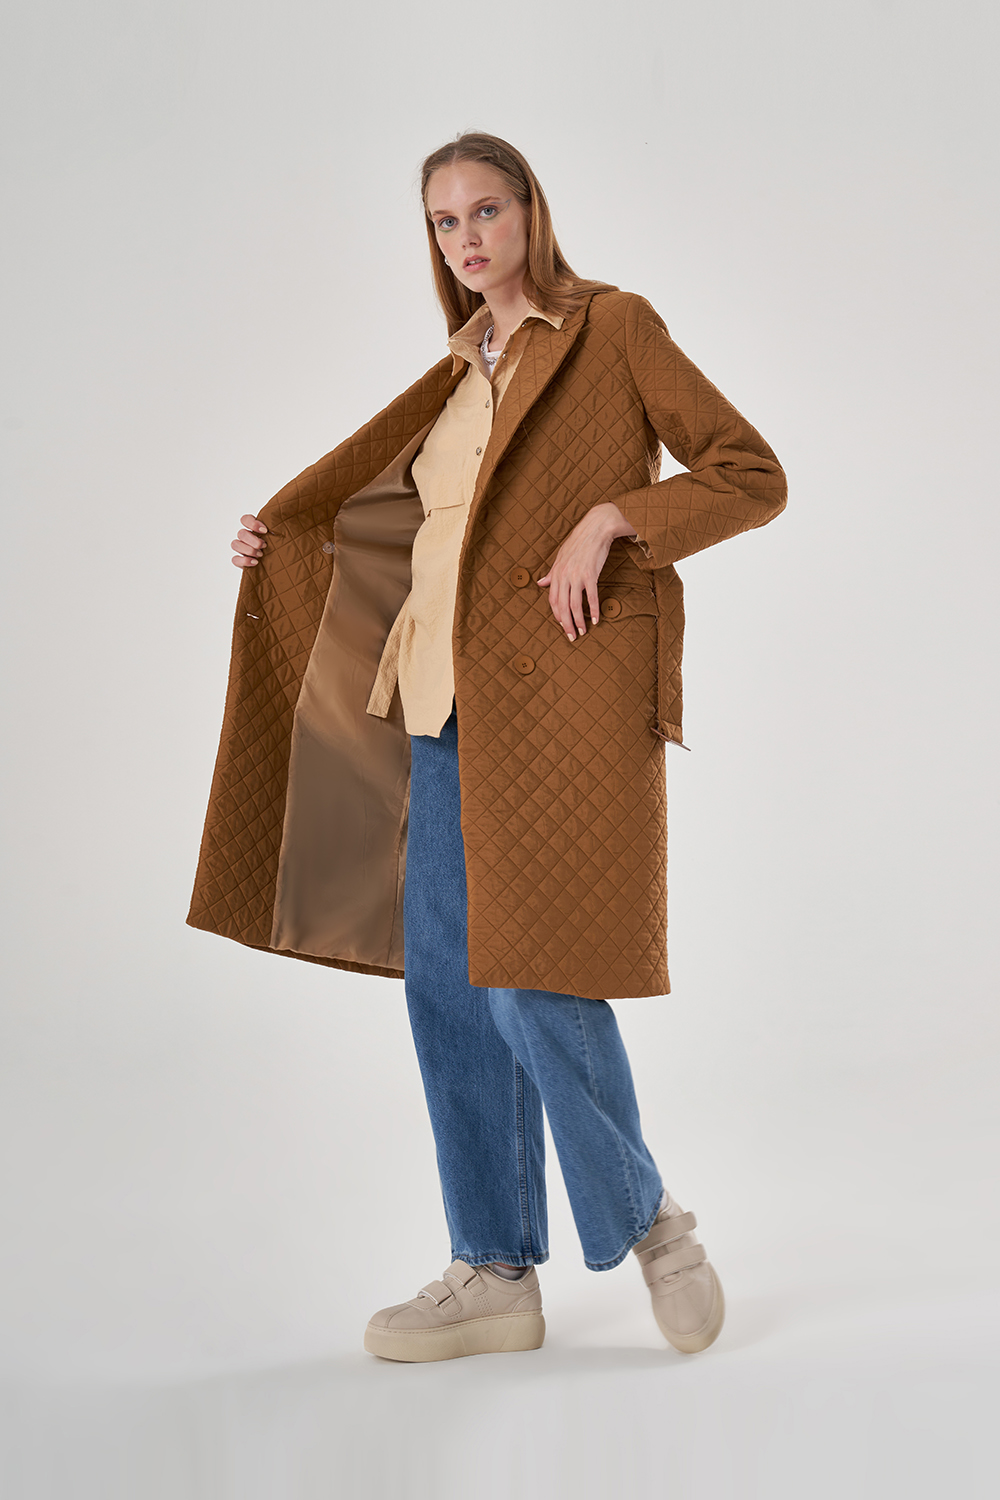 Quilted Textured Tan Overcoat